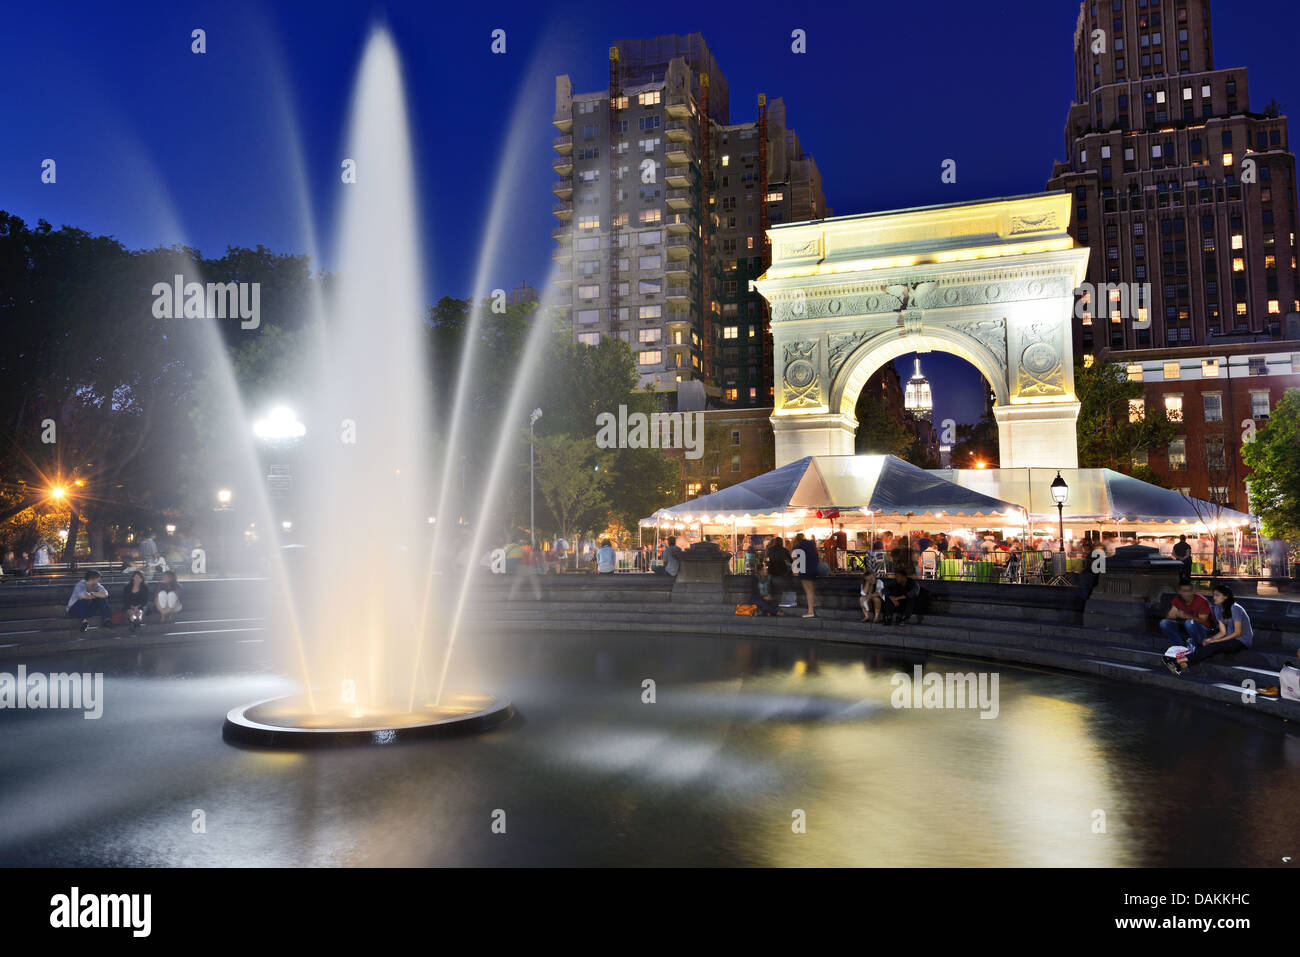 Washington Square Park at night in New York City during the summer months. Stock Photo